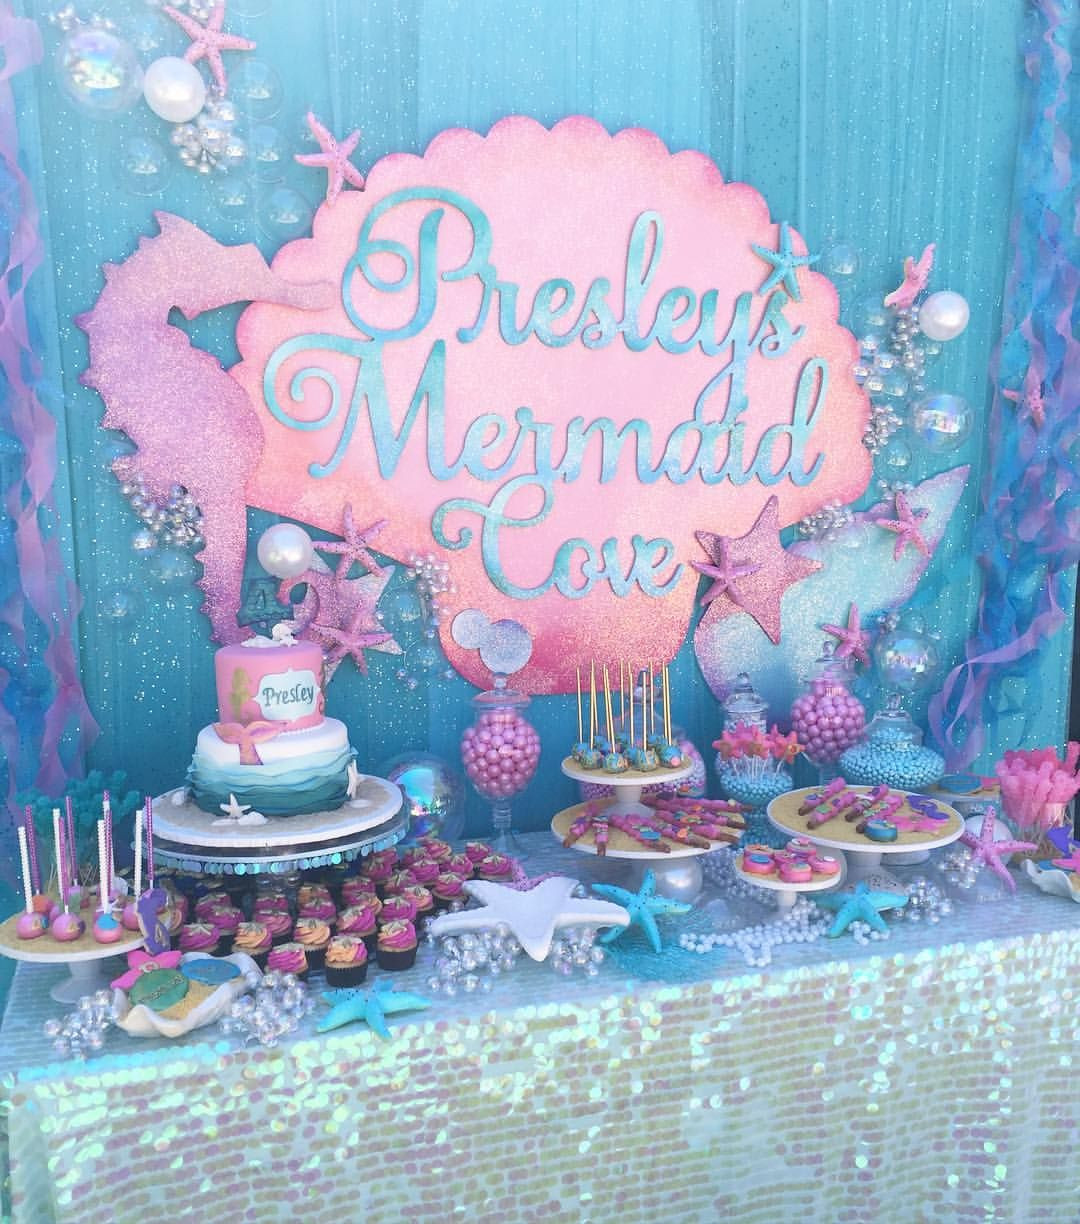 Ideas For A Mermaid Birthday Party
 Up bright and early for the most adorable mermaid party